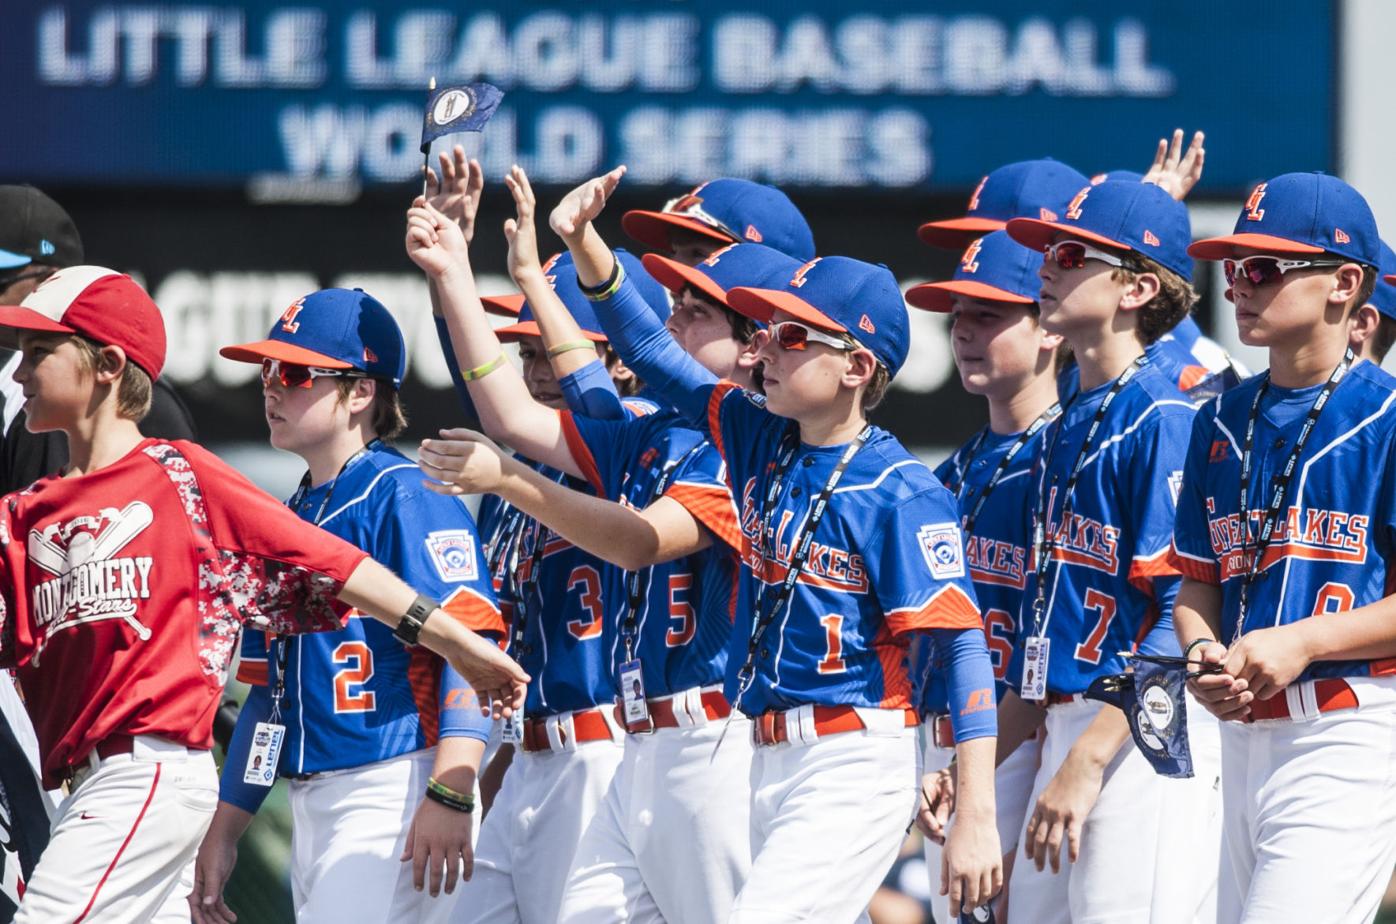 SLIDE SHOW Great Lakes (BG East) at Little League World Series